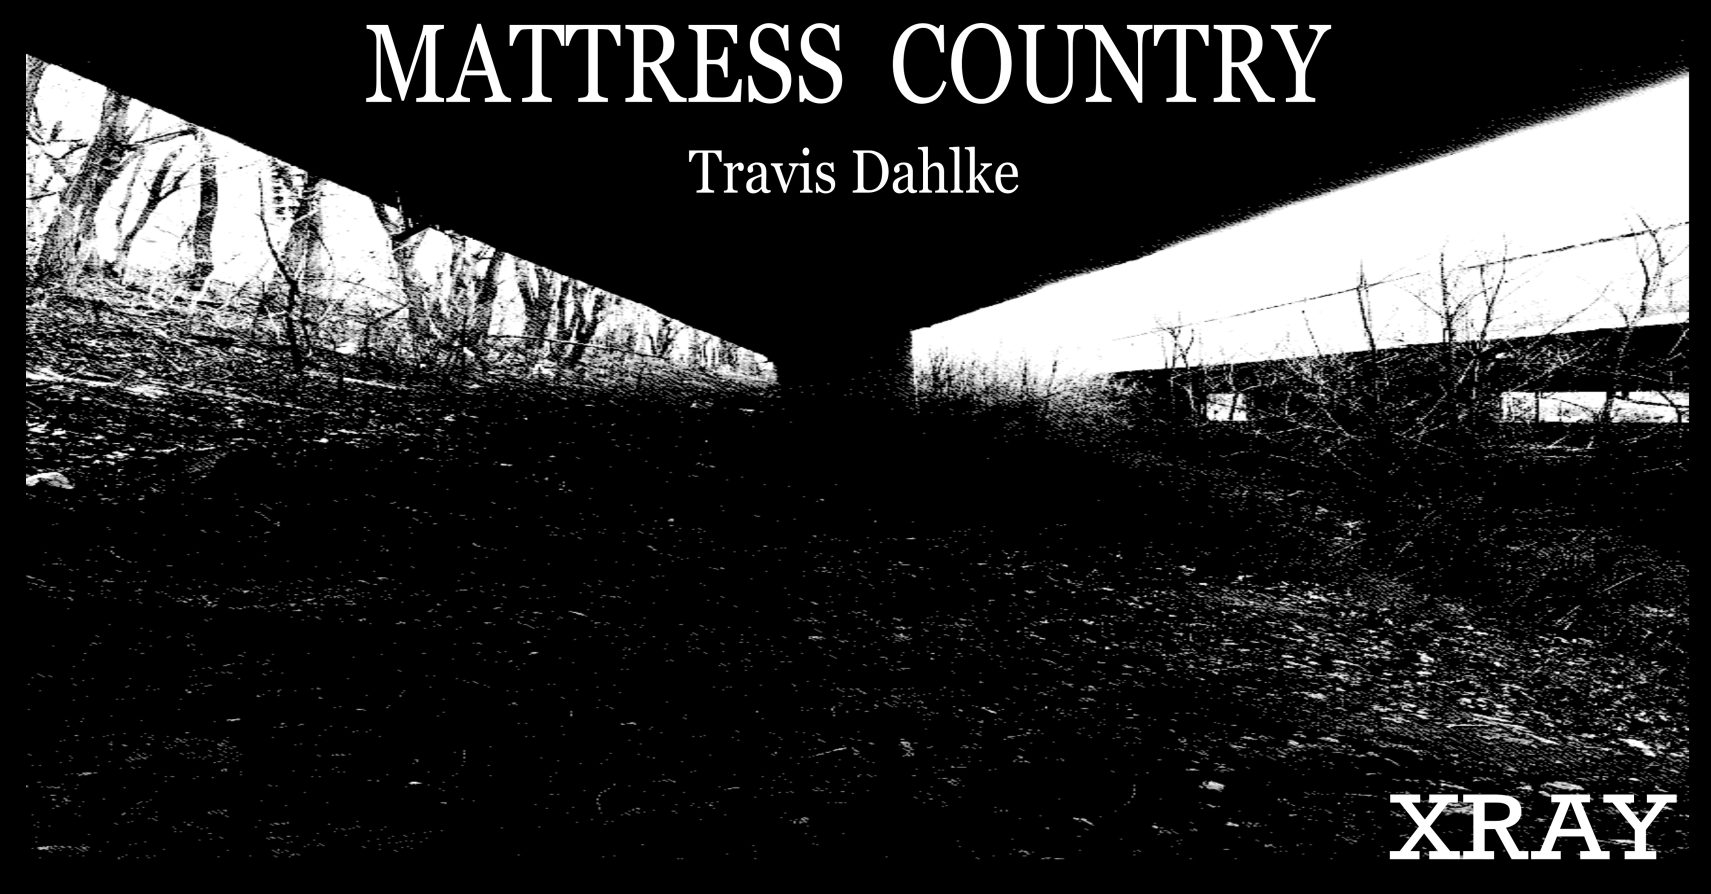 MATTRESS COUNTRY by Travis Dahlke